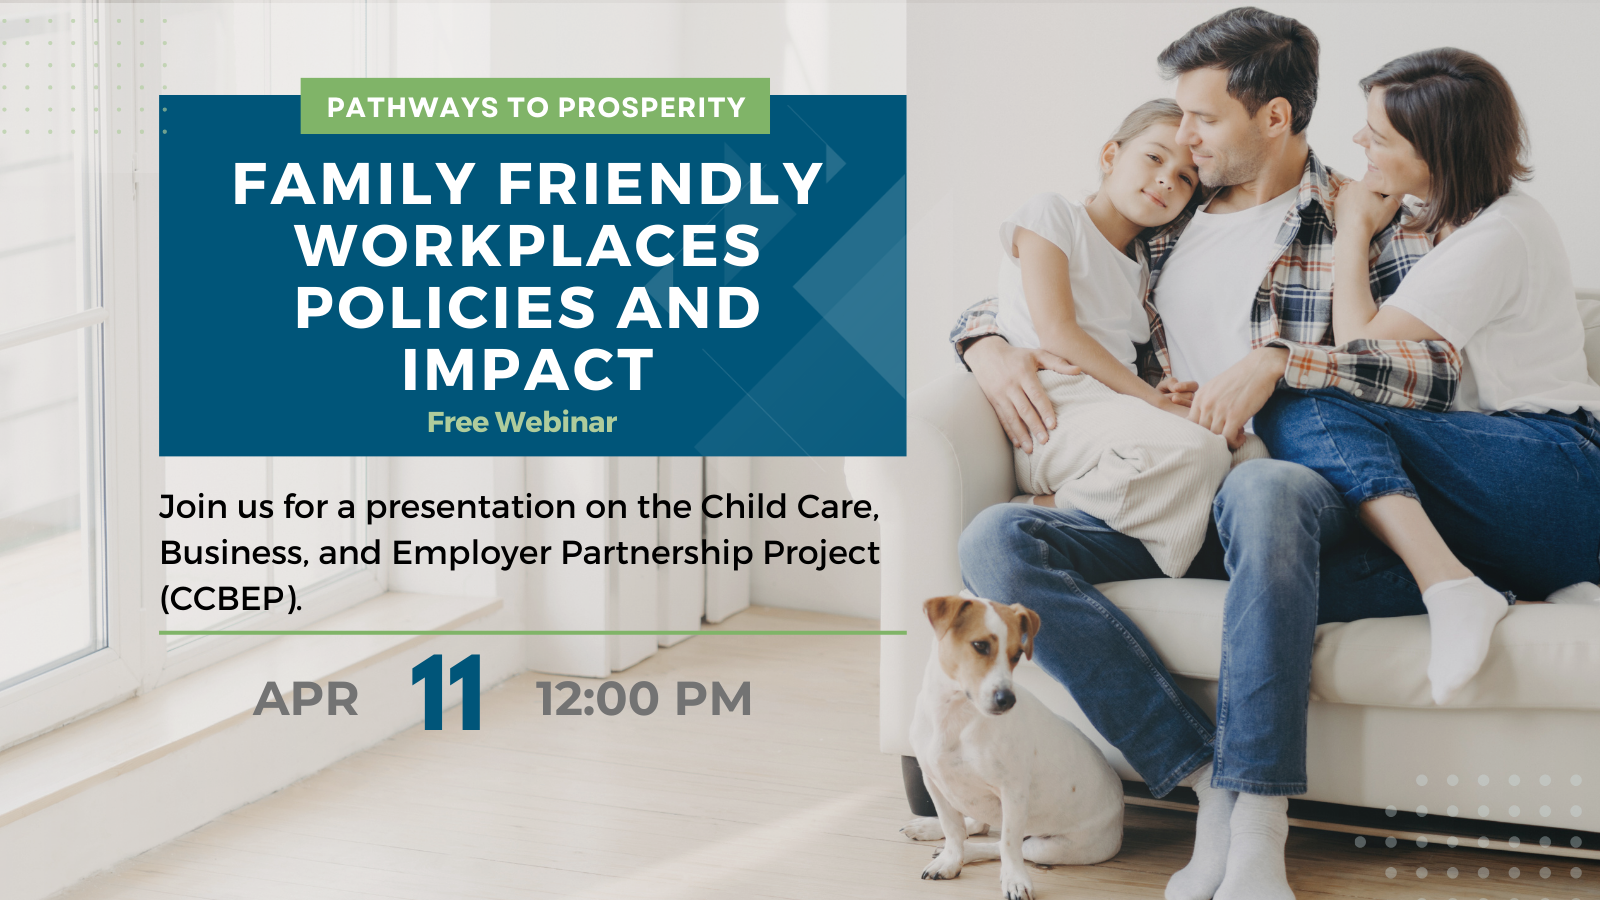 Join us for a presentation on the Child Care, Business, and Employer Partnership Project (CCBEP). This one-year research initiative is dedicated to advancing our understanding of the impact of child care access and family-friendly workplace policies on recruitment and retention of the global workforce. Through fostering meaningful cross-sector partnerships and implementing innovative initiatives, CCBEP aims to bring businesses into NH's child care expansion efforts and to empower working parents and caregivers to enter or remain in the workforce, achieve economic stability, and contribute to the vibrant New Hampshire economy. In this presentation, we will review the project scope and emerging data, and share about forthcoming pilot projects.